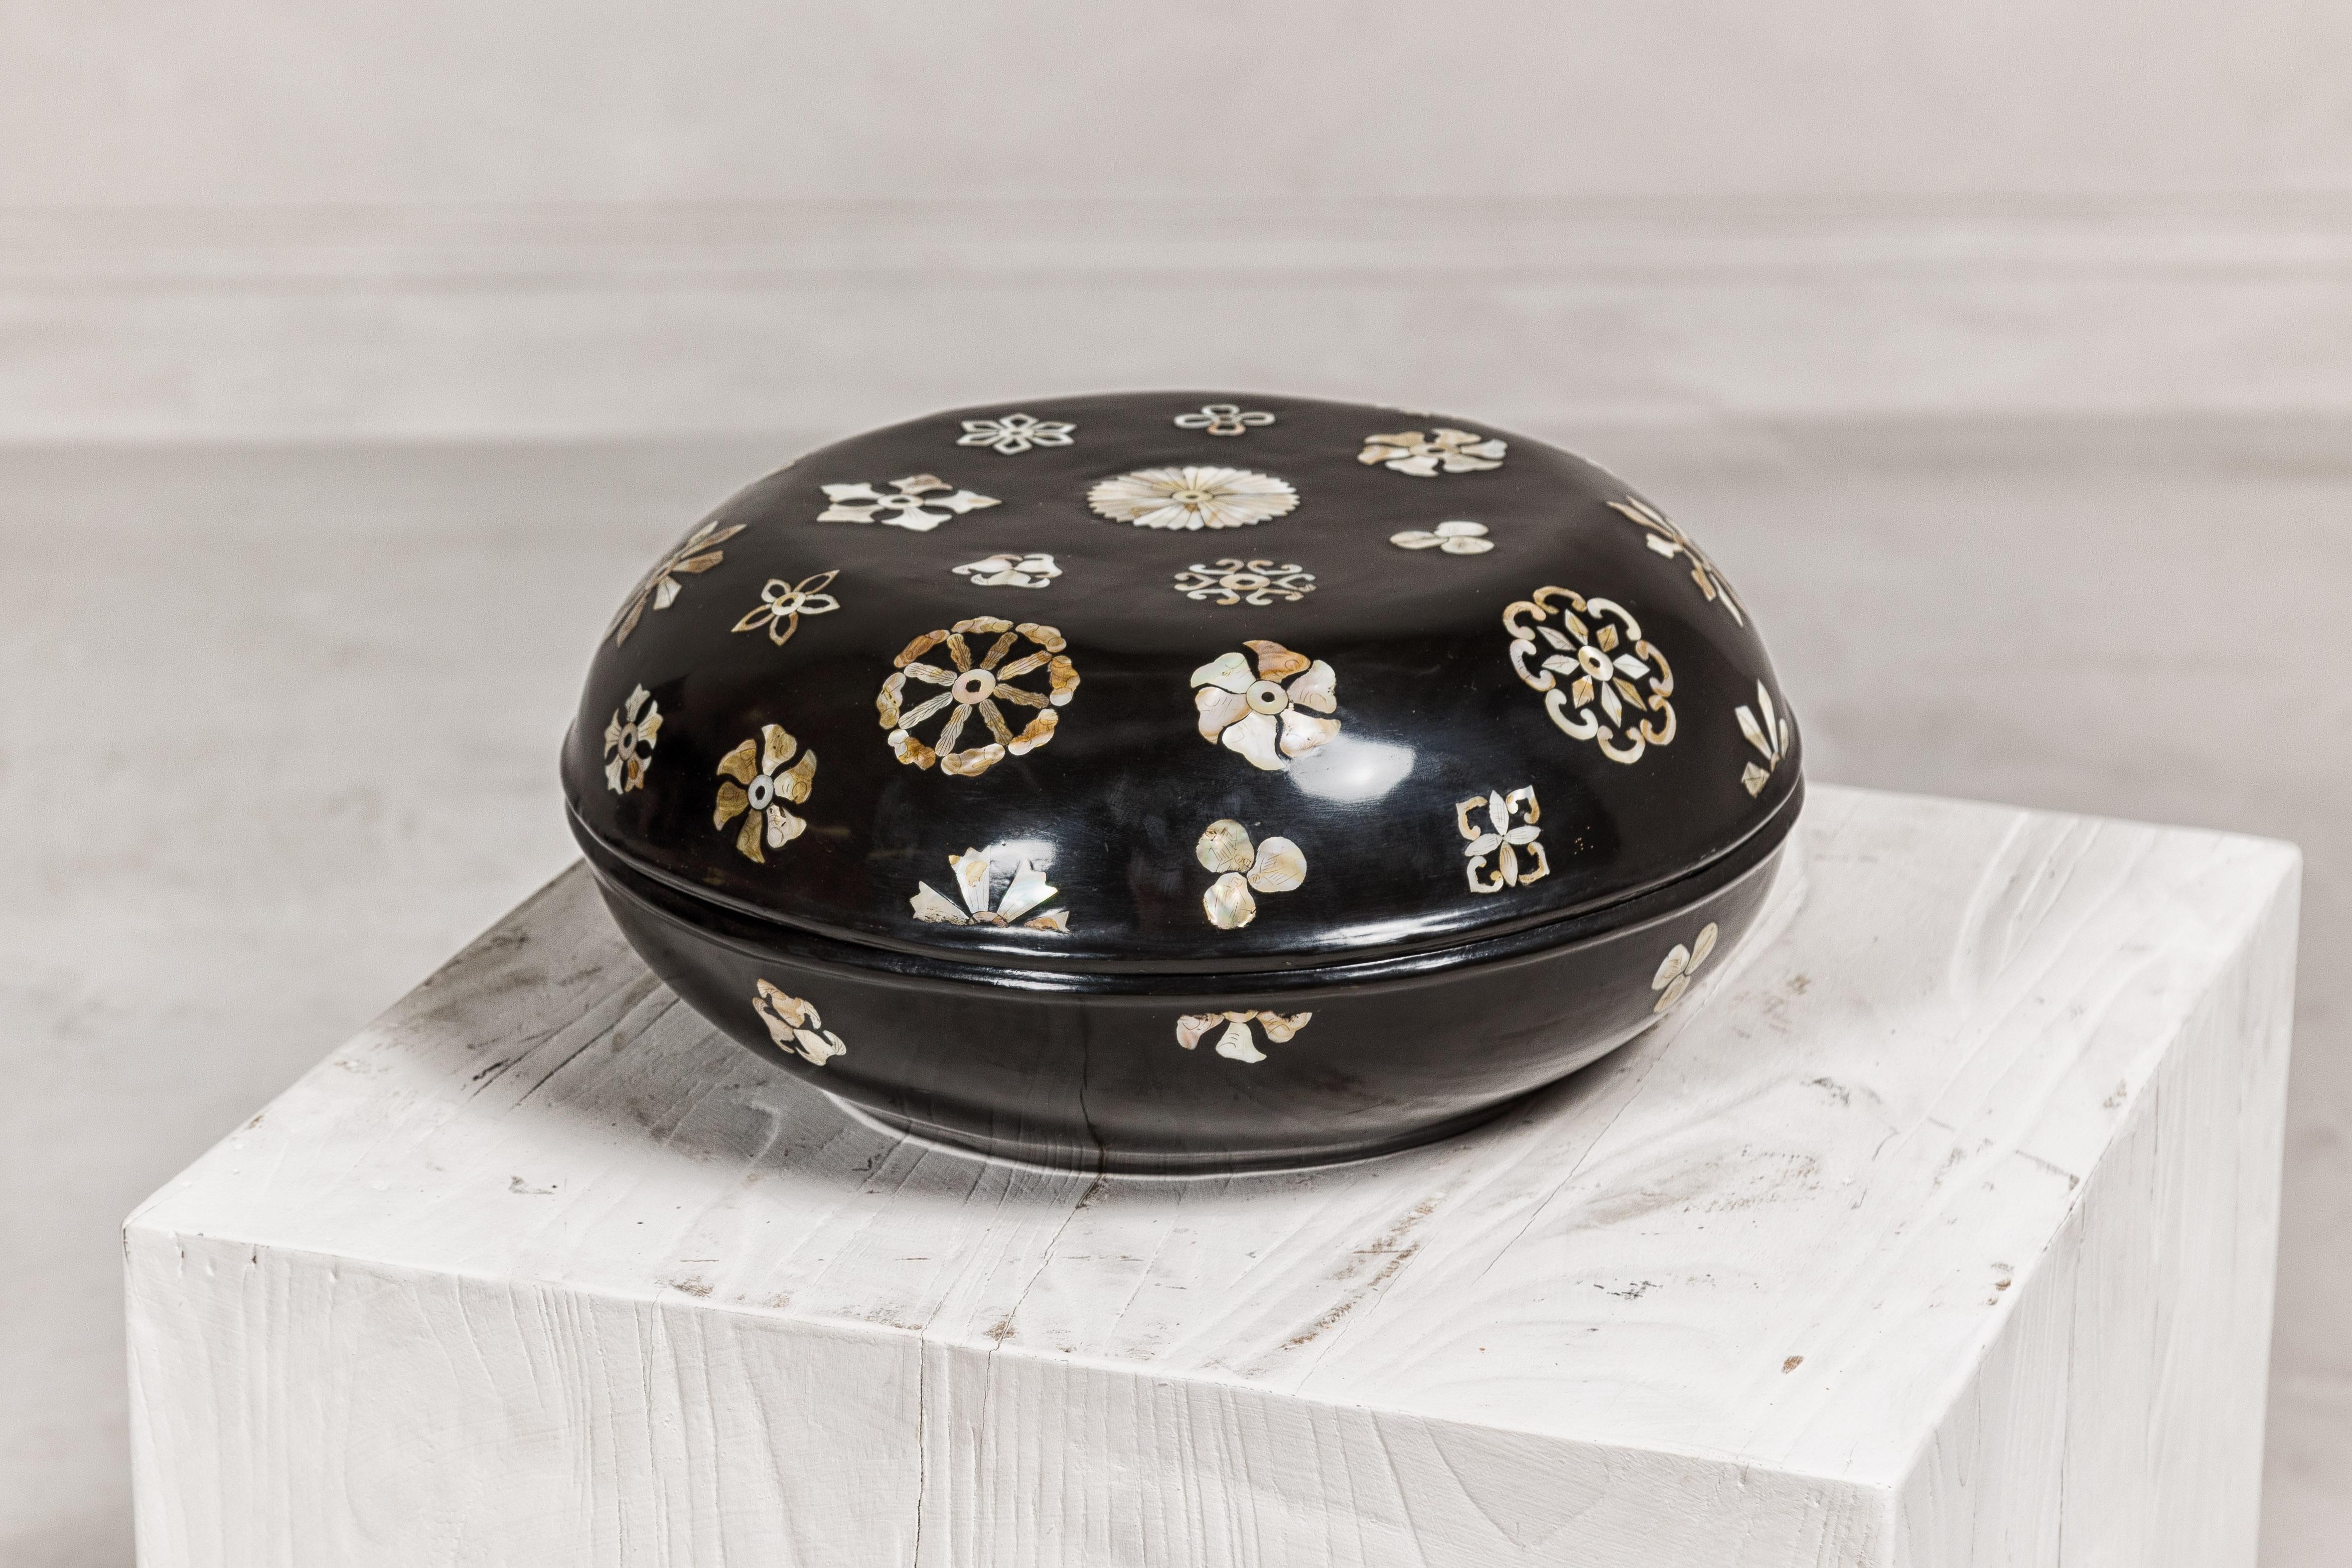 A vintage black lacquered lidded circular box with mother or pearl floral inlaid décor. This vintage Chinese black lacquered box is a testament to traditional craftsmanship, featuring a circular form that is both elegant and functional. The lid is